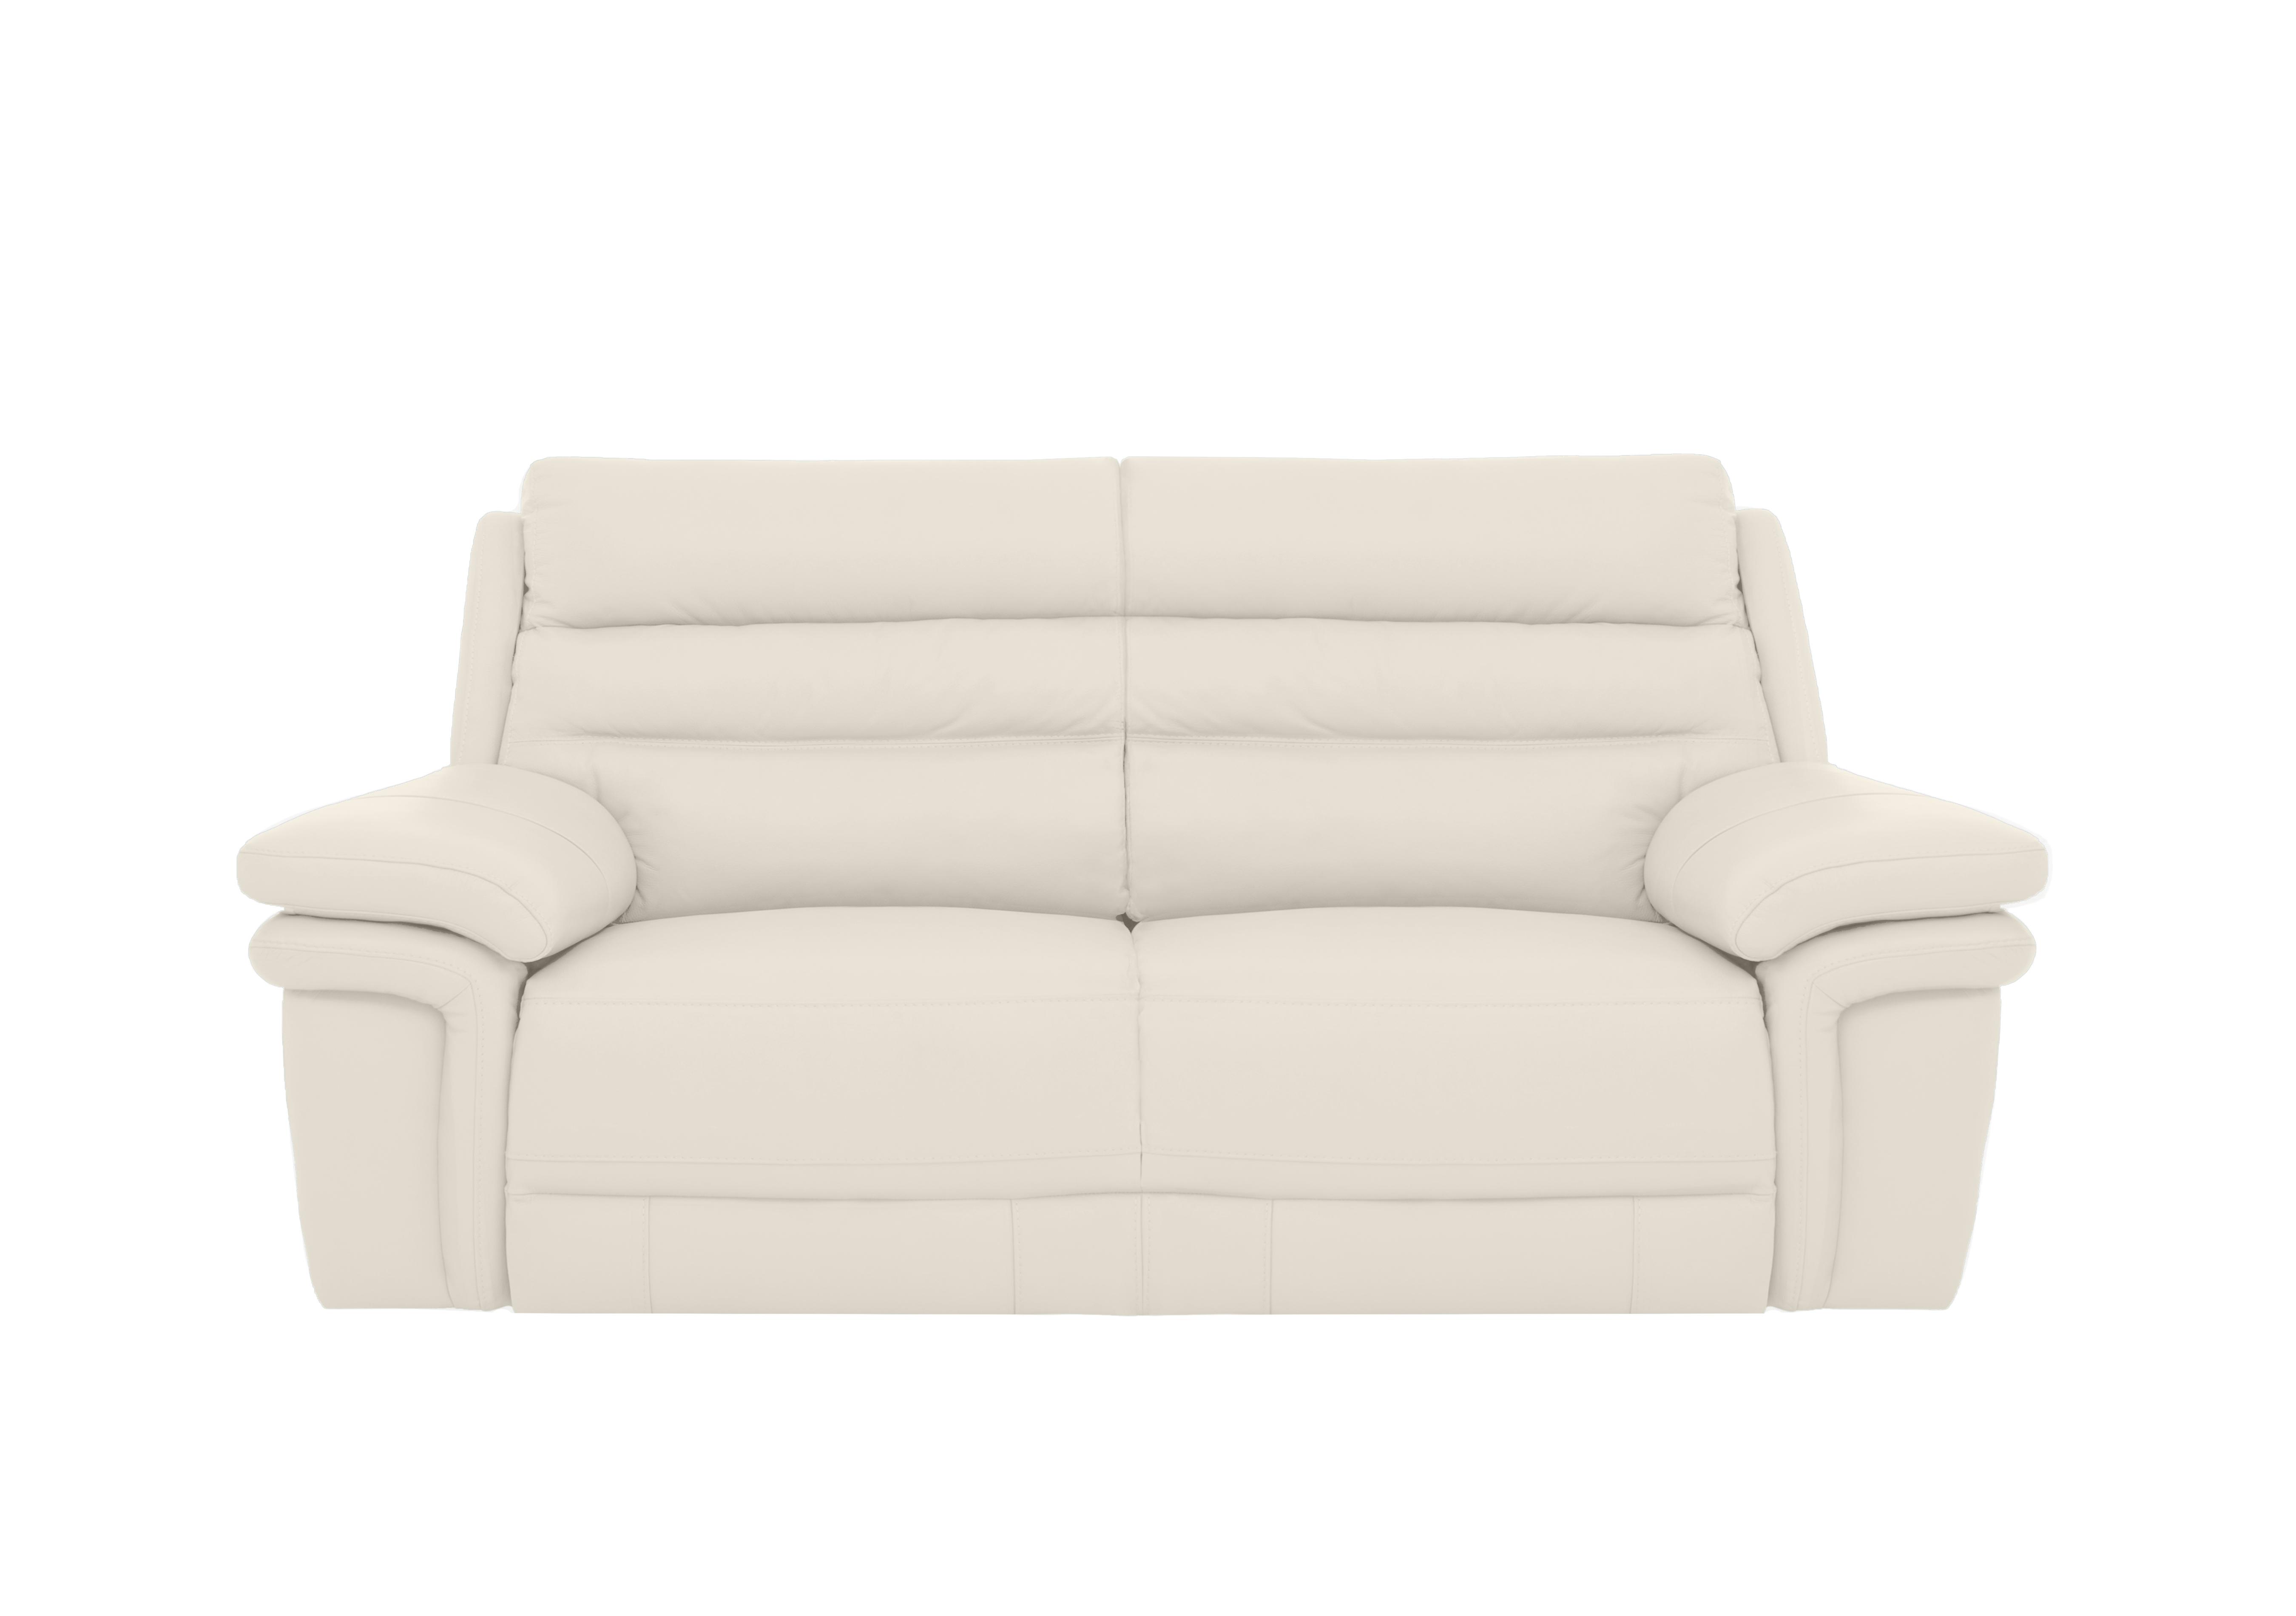 Berlin 3 Seater Leather Sofa in White Le-9307 on Furniture Village